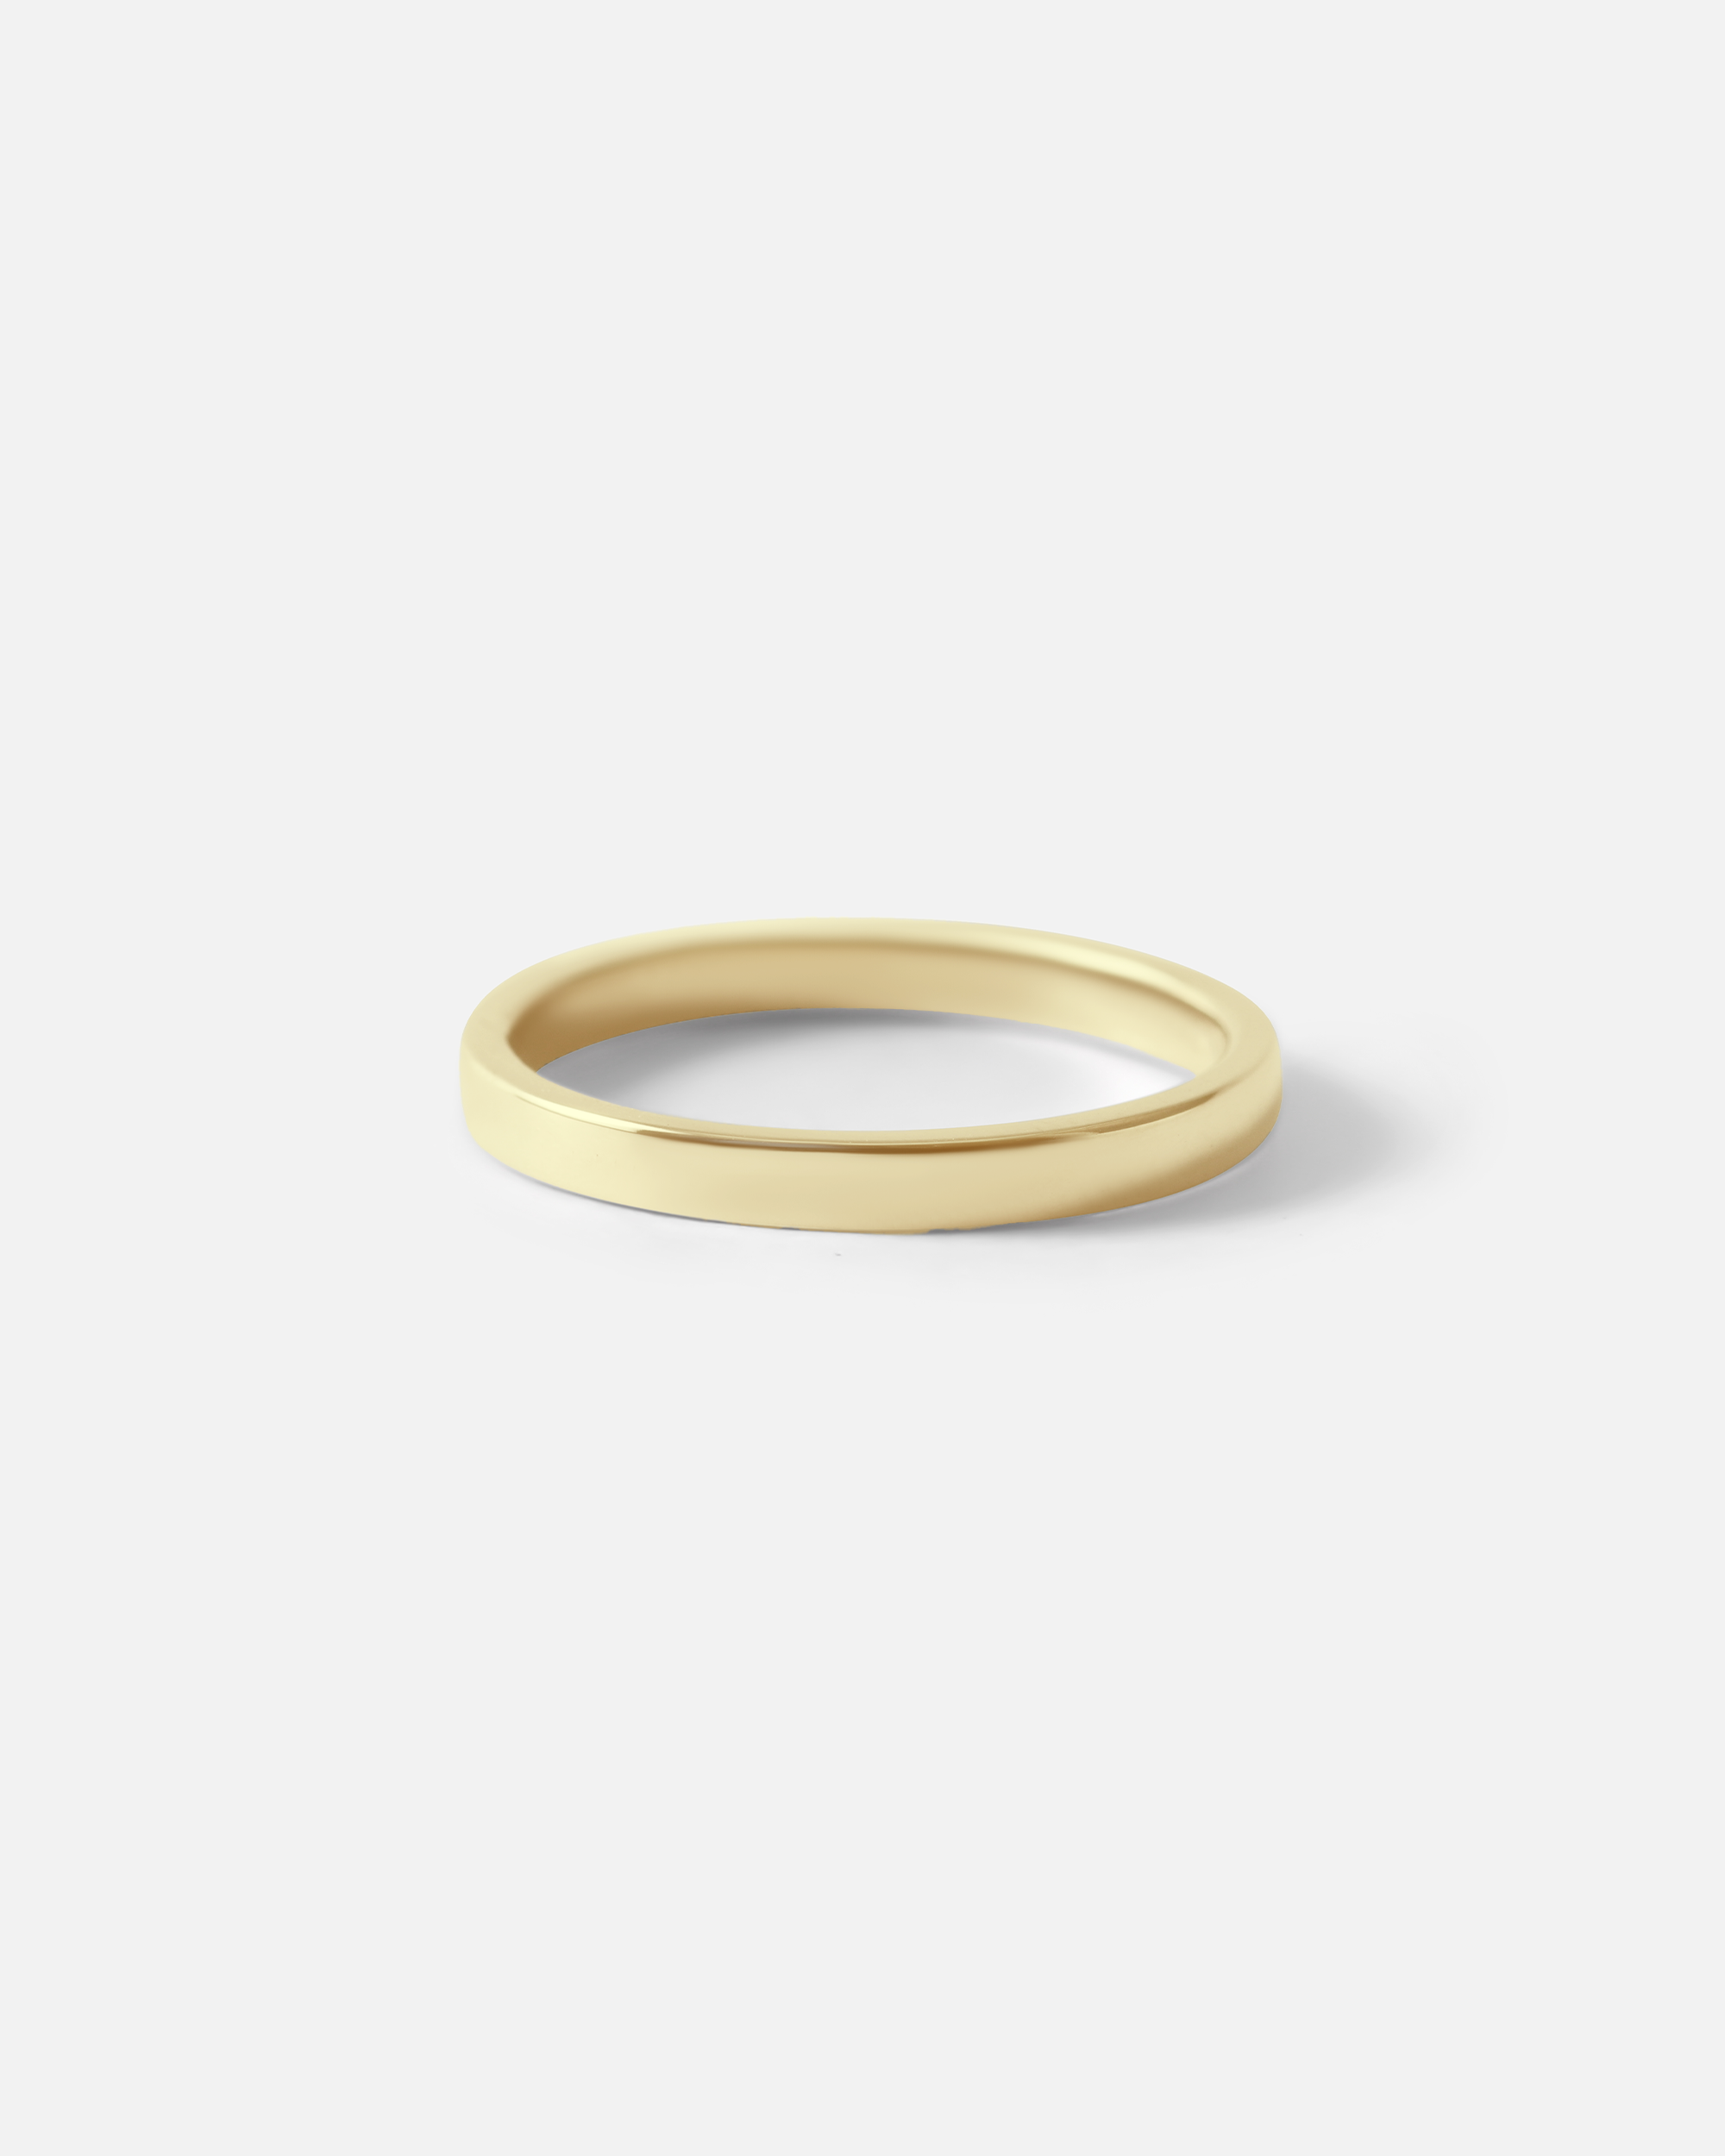 Angled view of Flat Band / 2mm Customizable By Hiroyo in 14k yellow gold